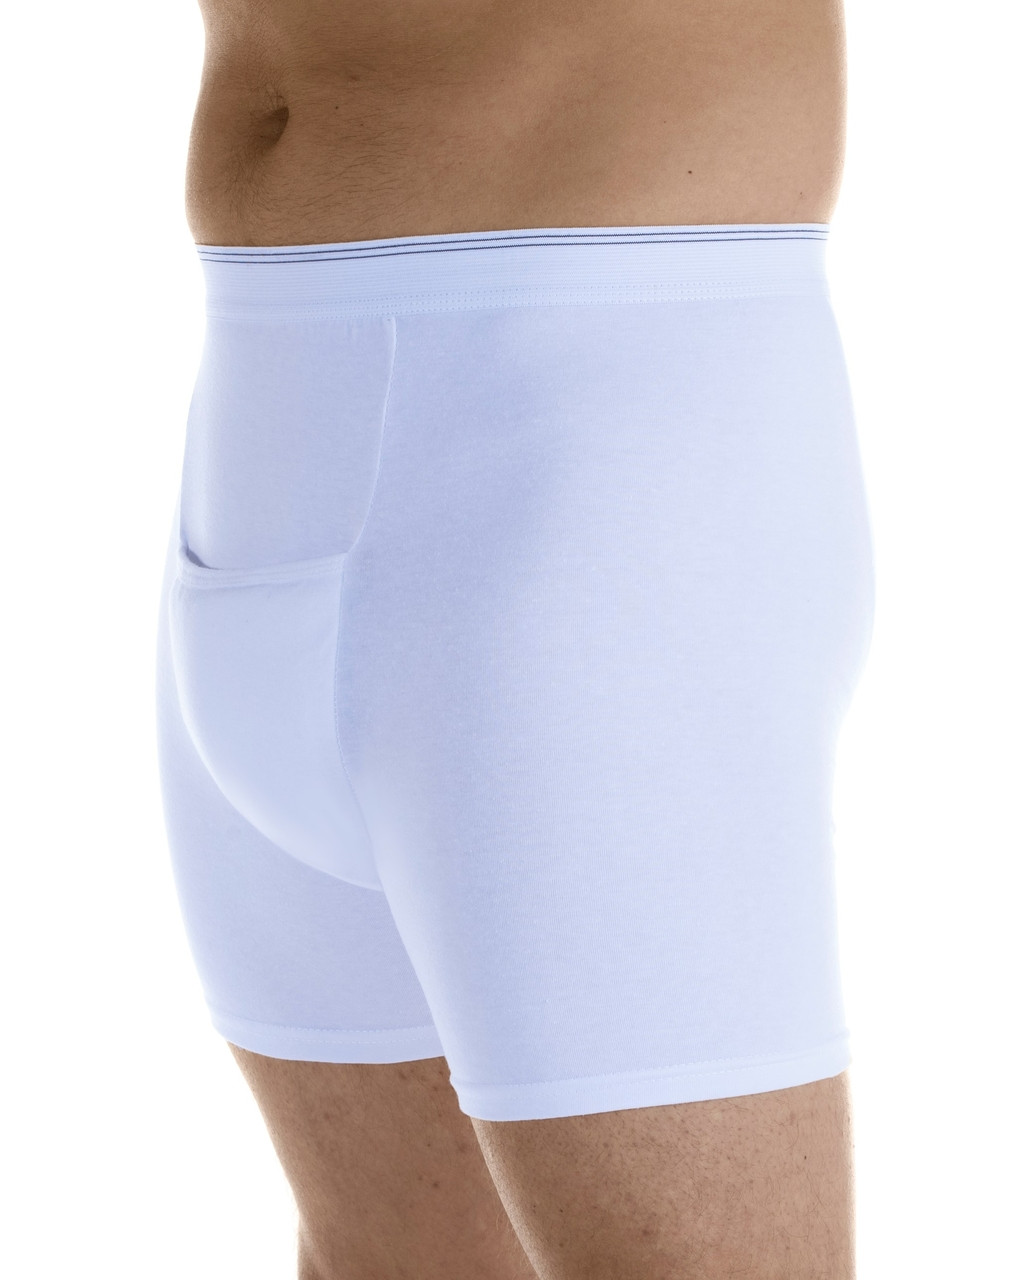 Mens Incontinence Underwear Leakproof Reusable Heavy Absorbency